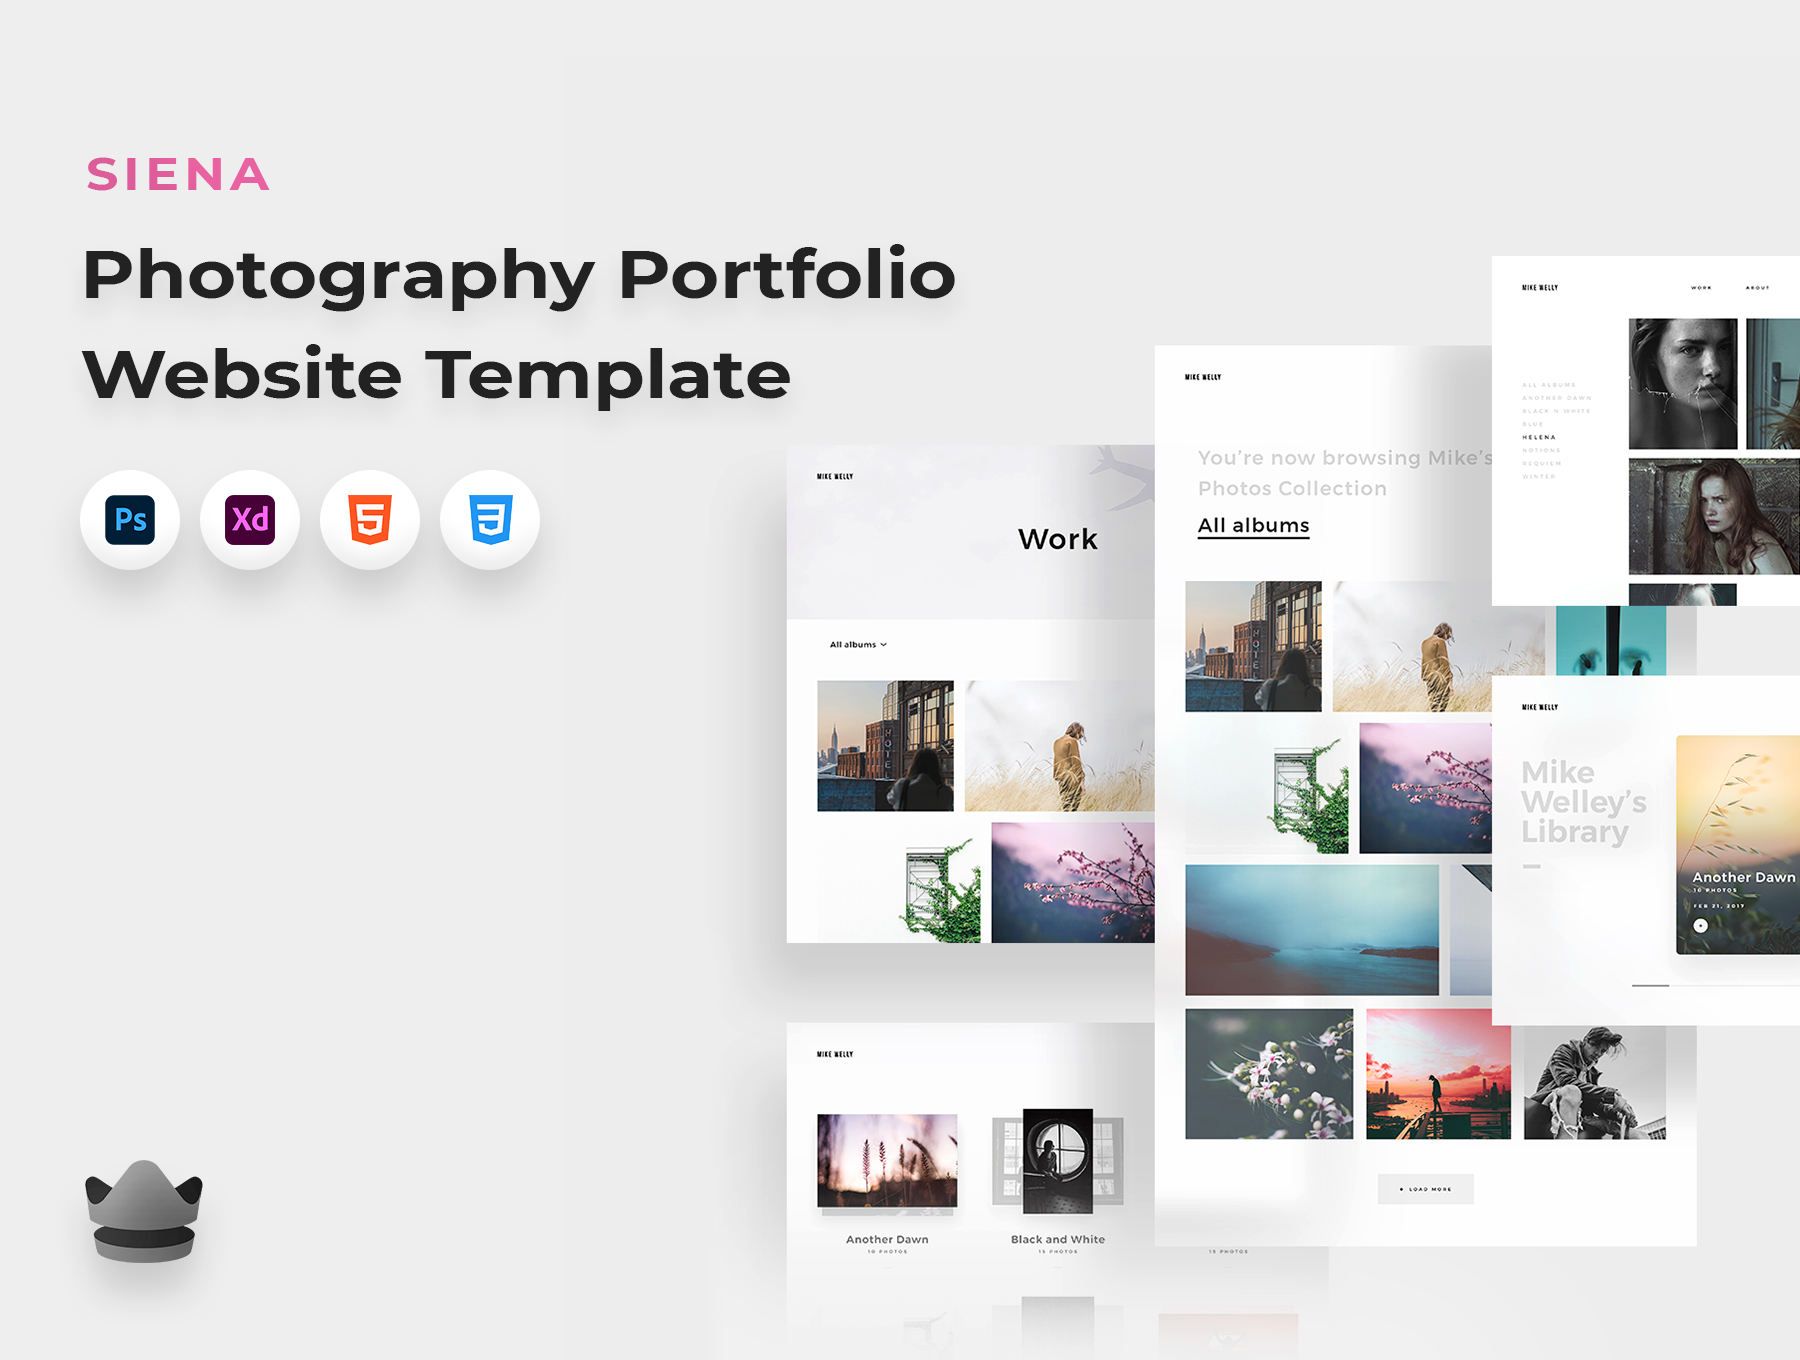 siena-photography-website-template-cover_1618766772968